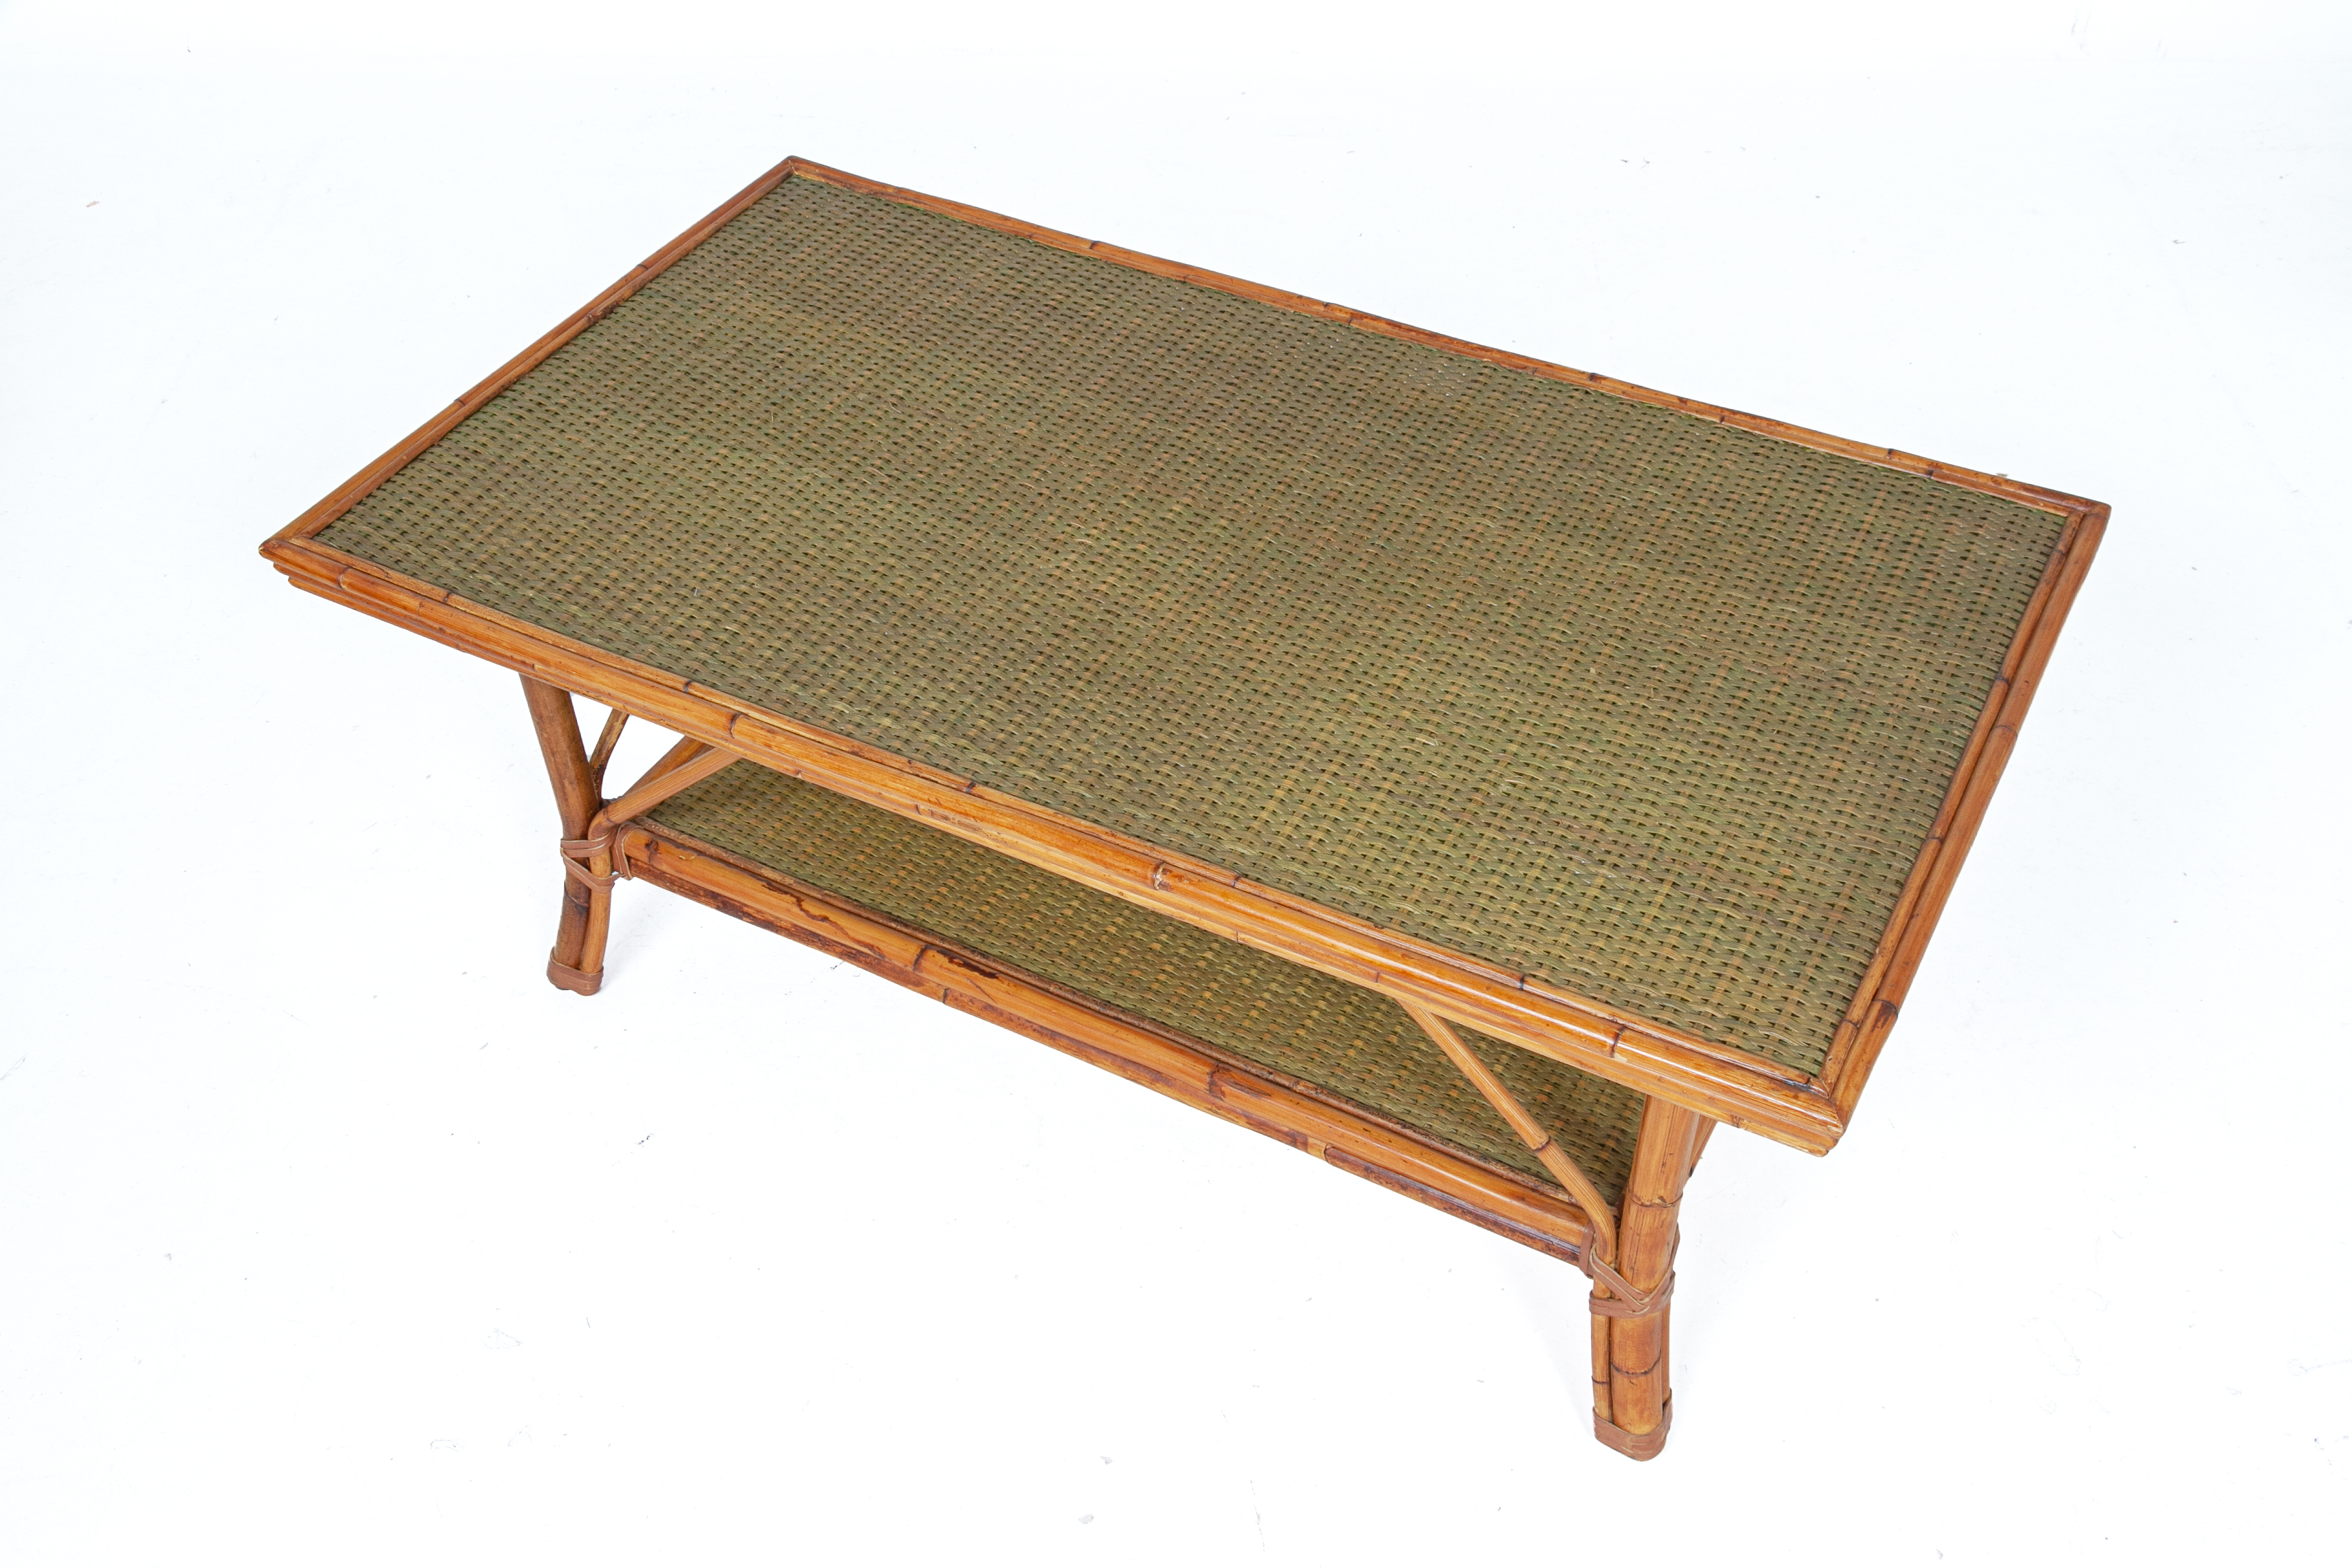 A BAMBOO CANED FOUR PIECE FURNITURE SUITE - Image 3 of 6